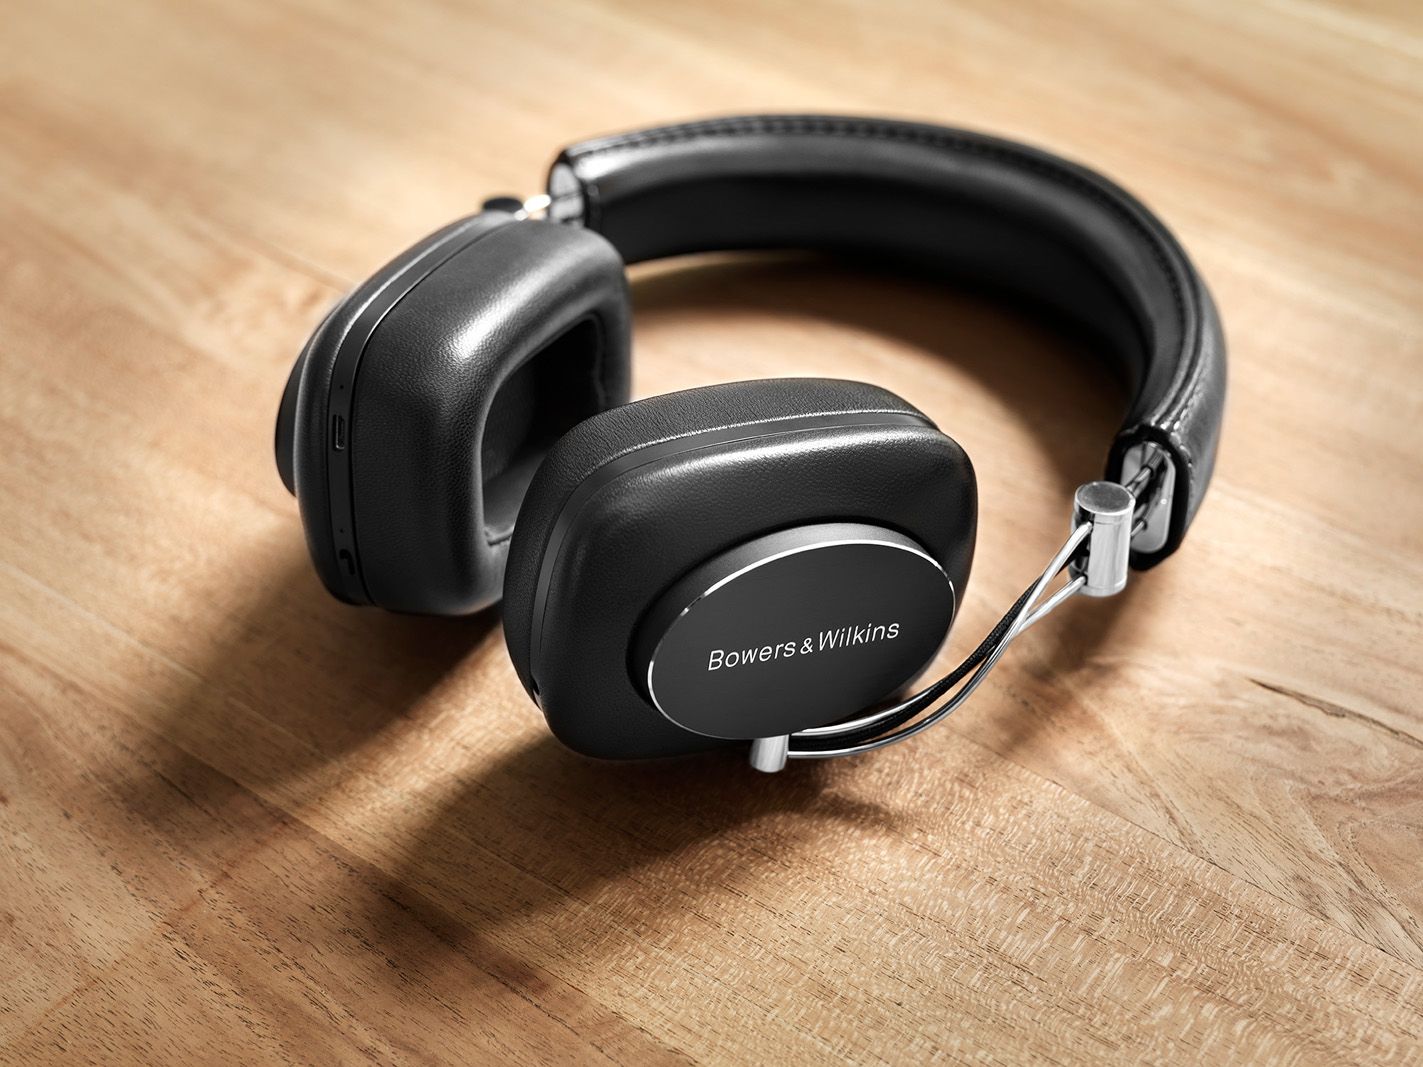 bowers wilkins p7 headphones go wireless perfect match for iphone 7 image 1